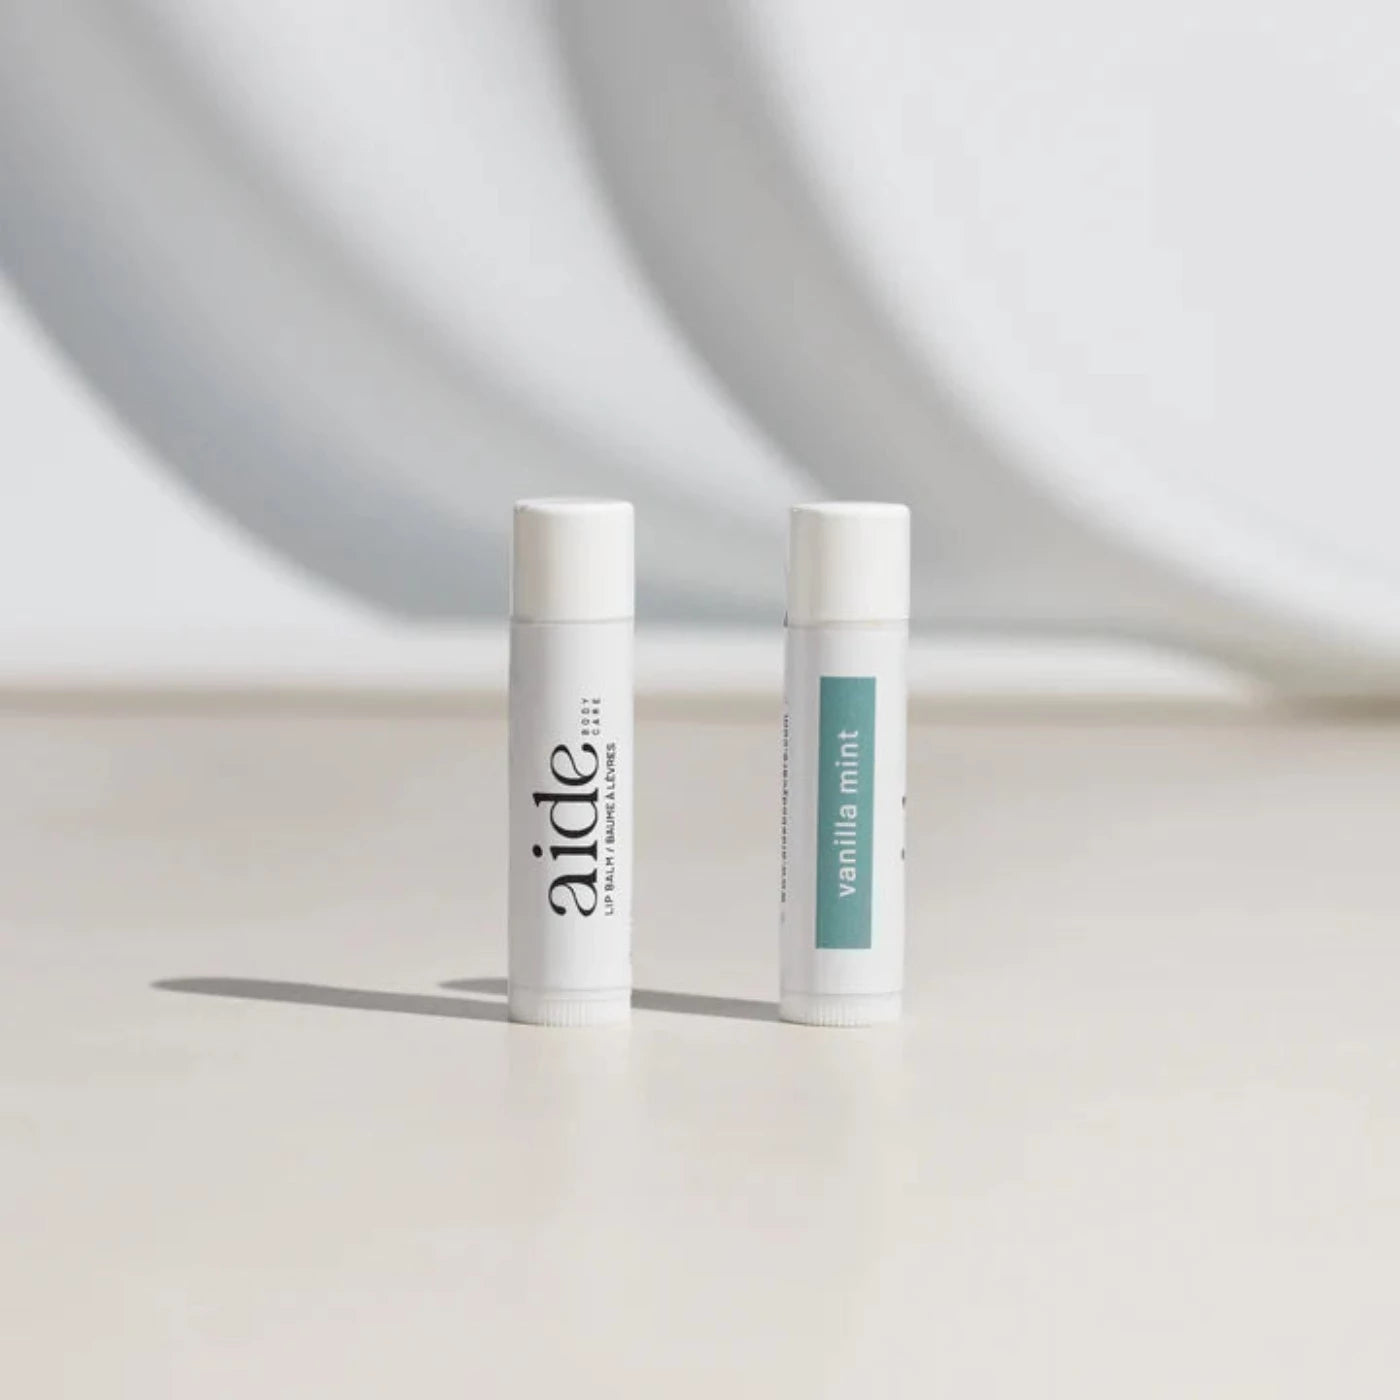 Two side by side white lip balm containers, with one showing the Aide wordmark, and the other showing a teal rectangle that reads "Vanilla Mint"